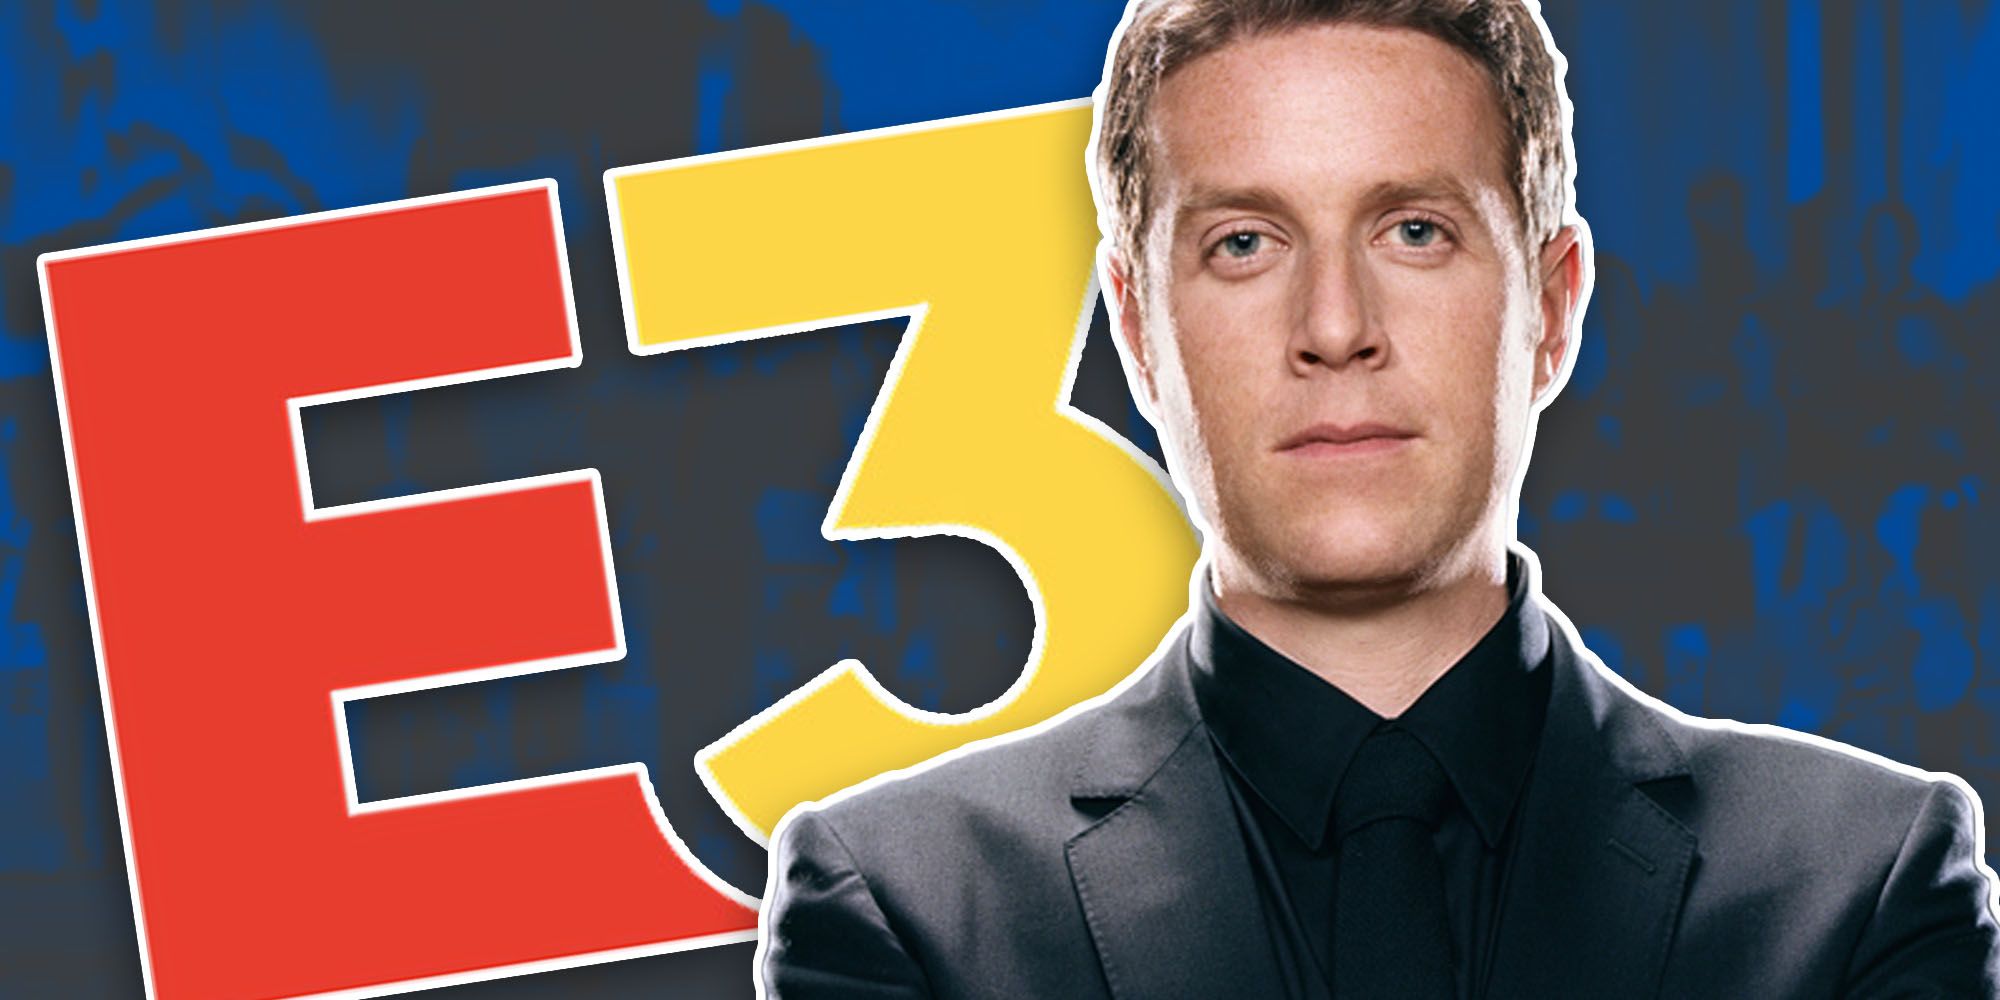 Geoff Keighley in front of the E3 logo